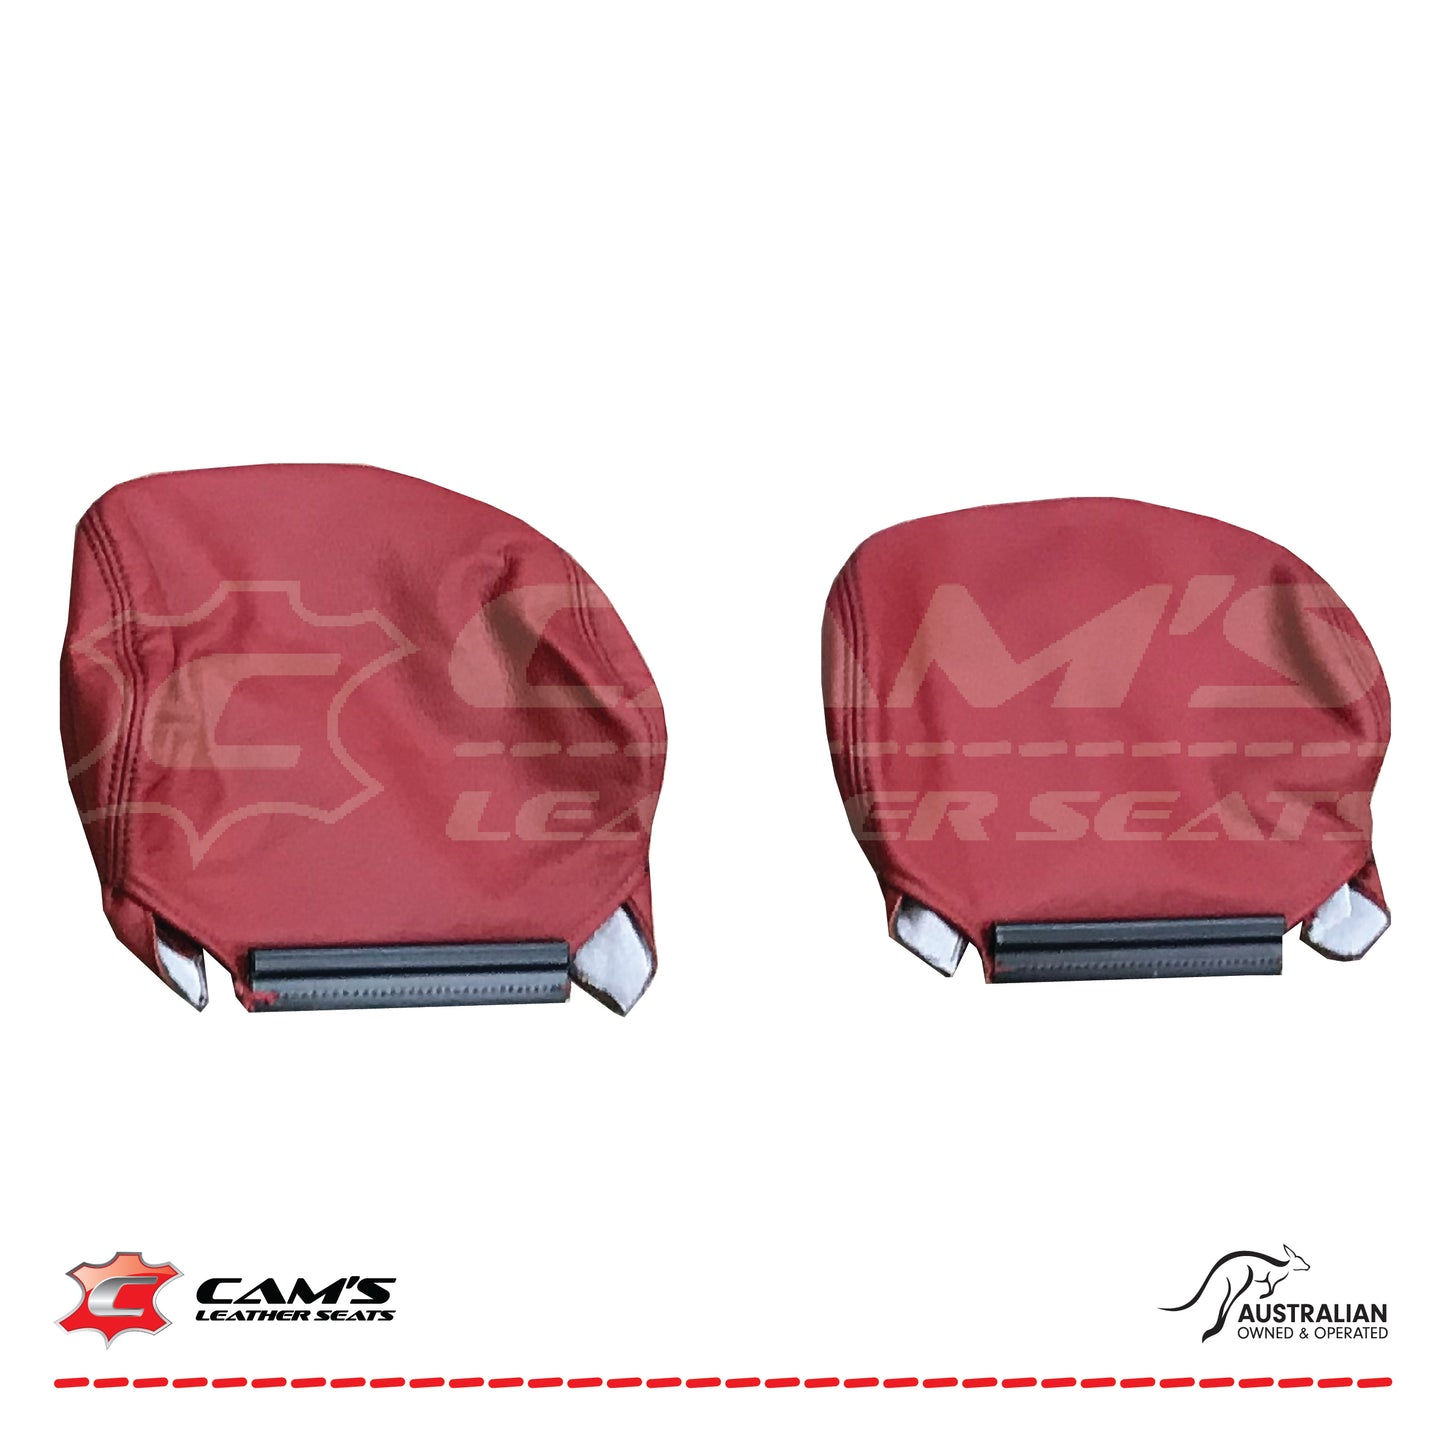 LEATHER SEATS TRIM KIT FOR HOLDEN VY SERIES 1 SS UTE RED HOT FACTORY STYLE